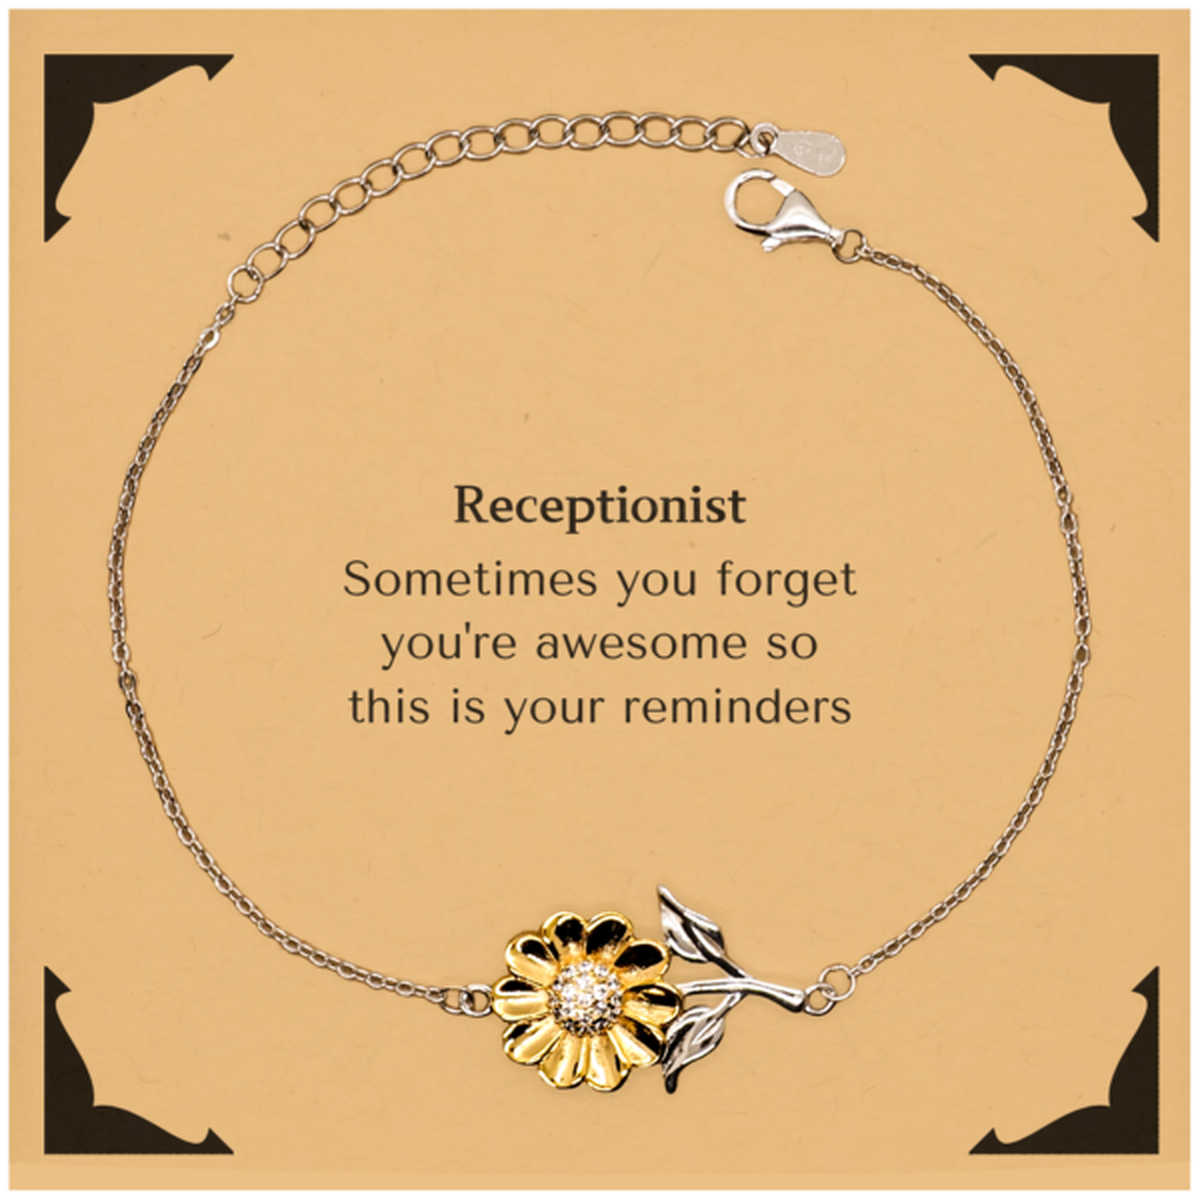 Sentimental Receptionist Sunflower Bracelet, Receptionist Sometimes you forget you're awesome so this is your reminders, Graduation Christmas Birthday Gifts for Receptionist, Men, Women, Coworkers